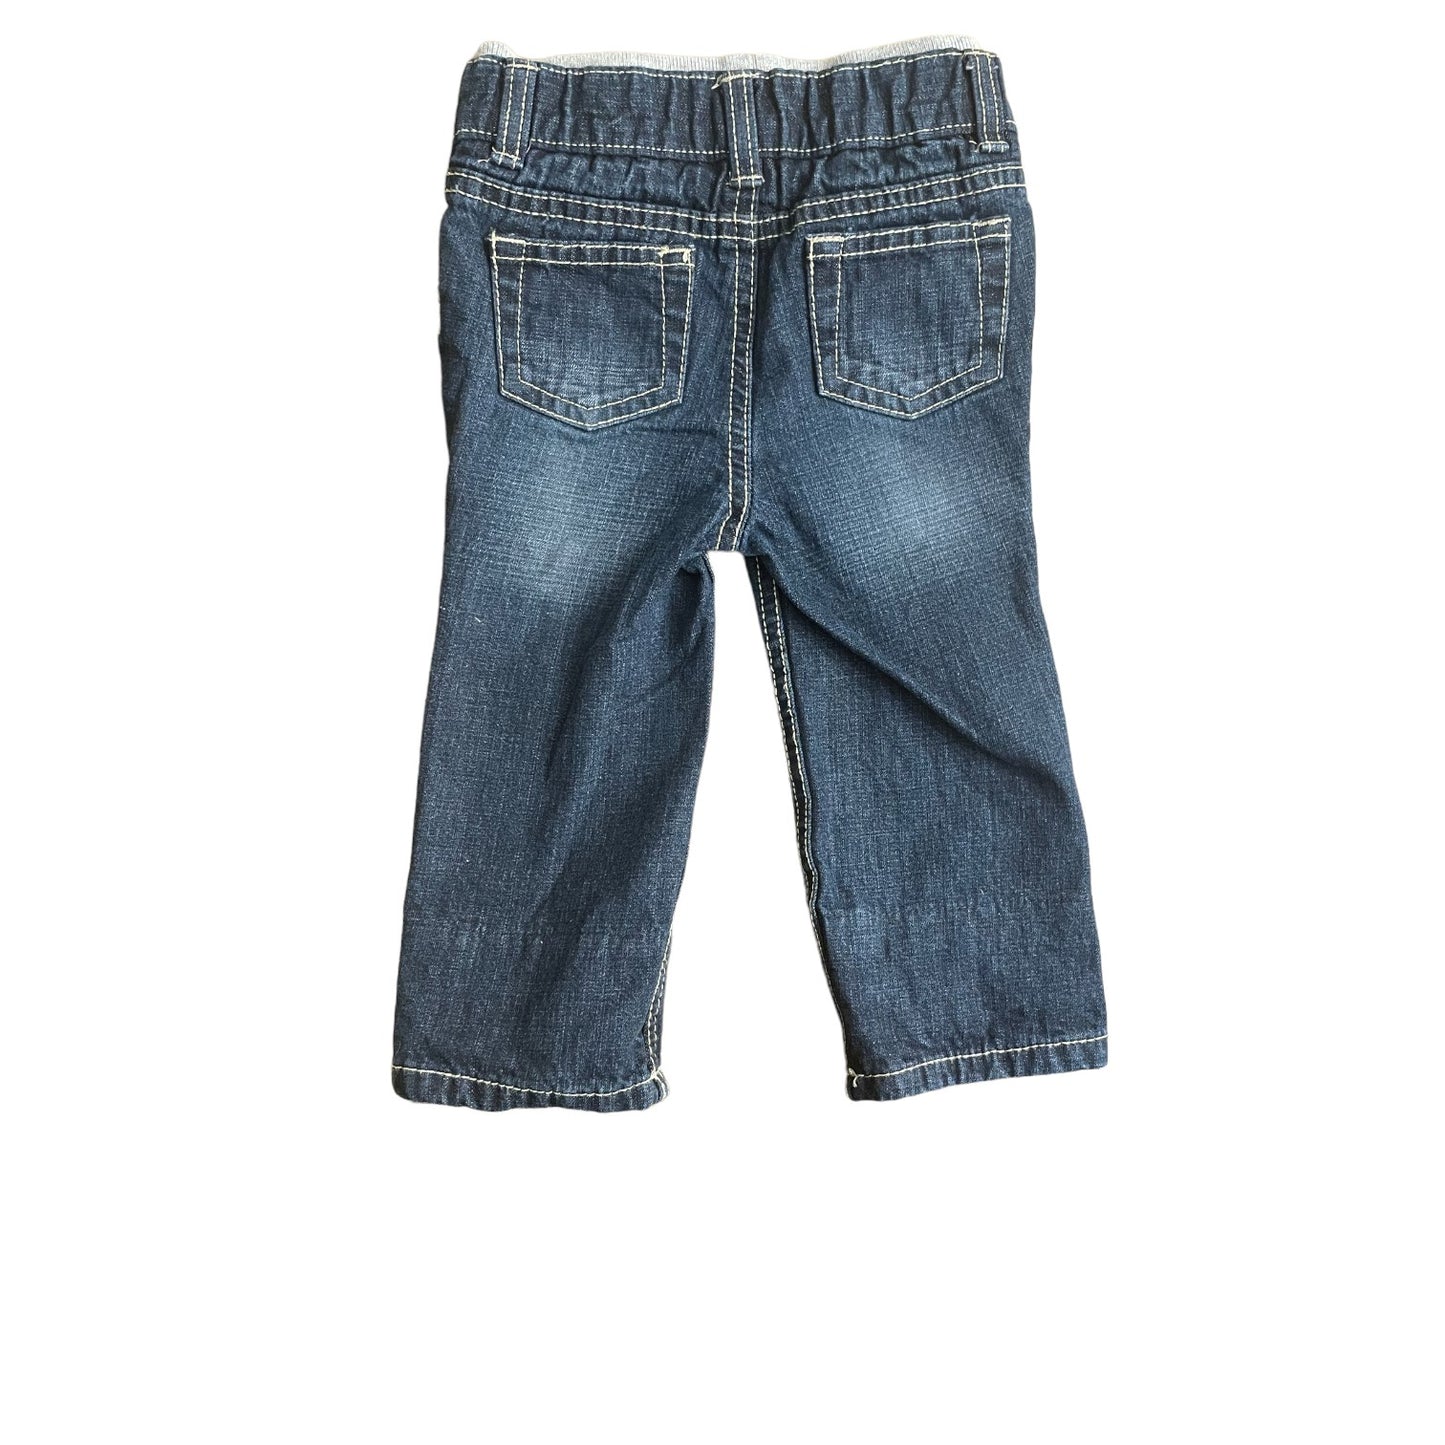 Baby Jeans Size (6-9 months)